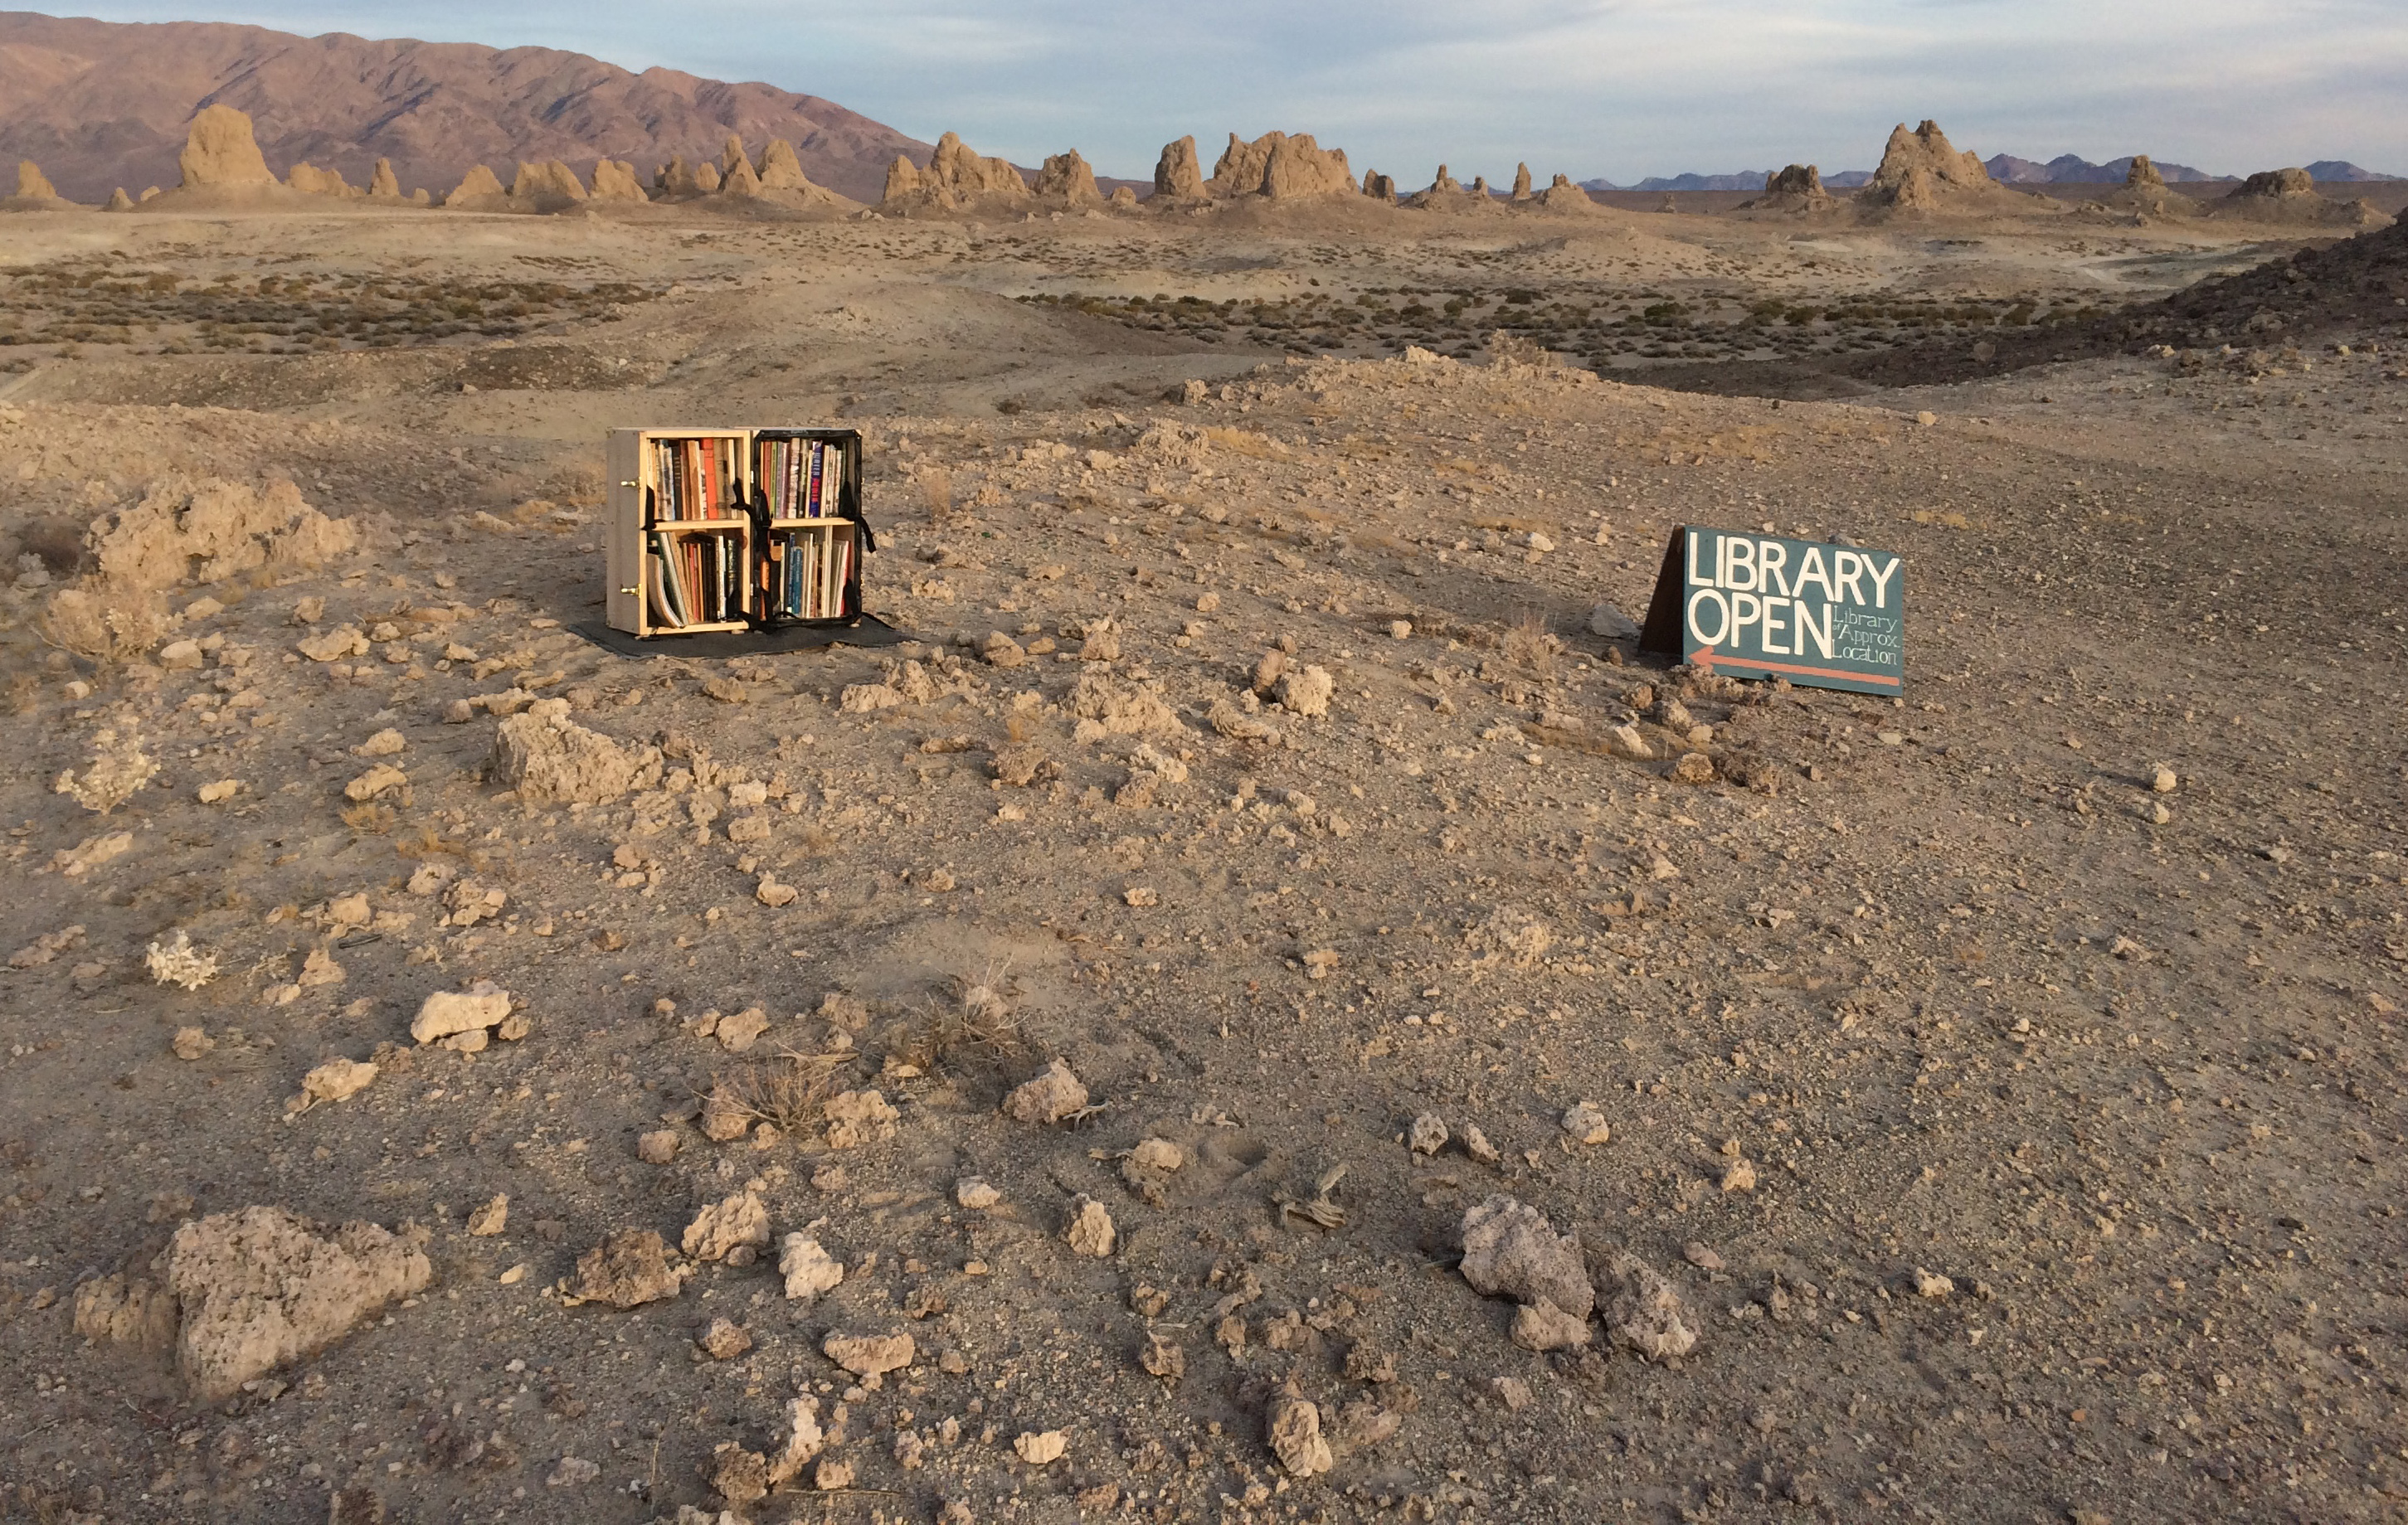 Library of Approximate Location installed at Trona Pinnacles